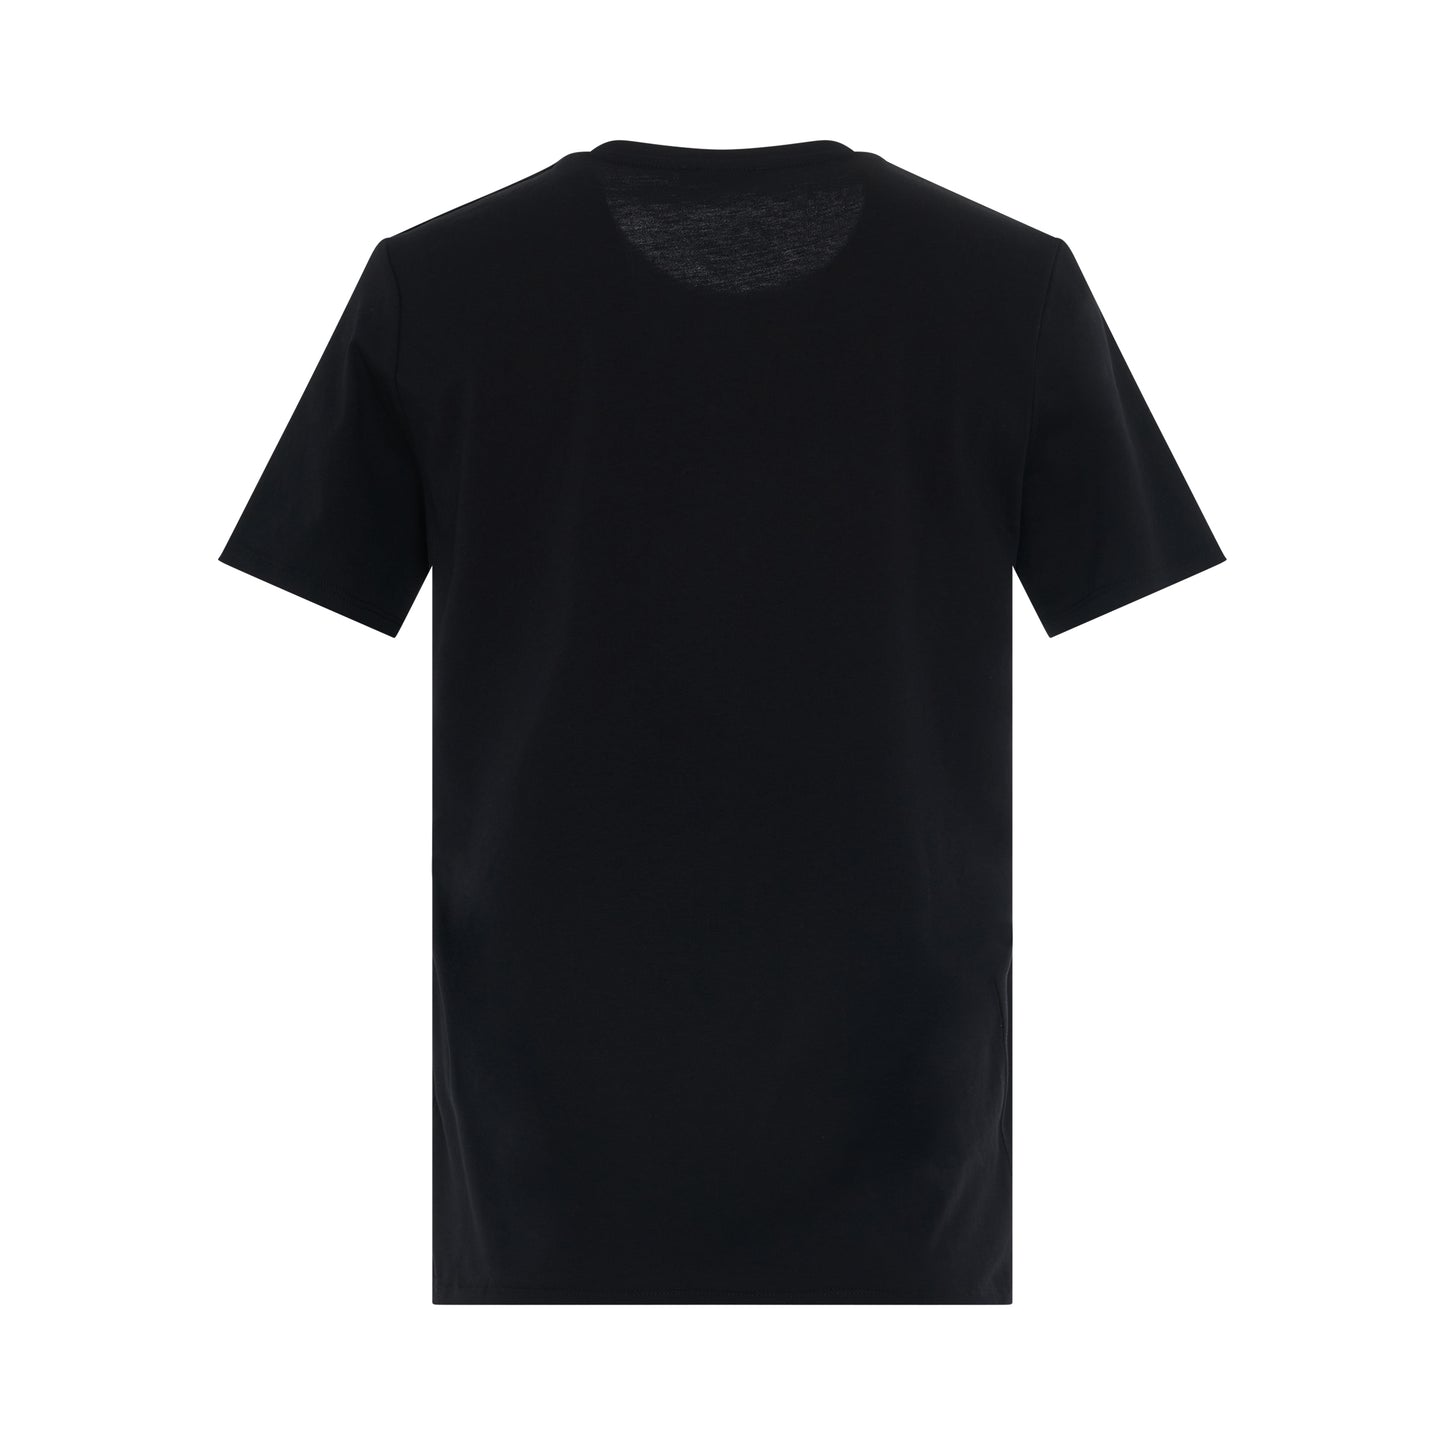 3 Button Flocked Logo Classic Fit T-Shirt in Black/White